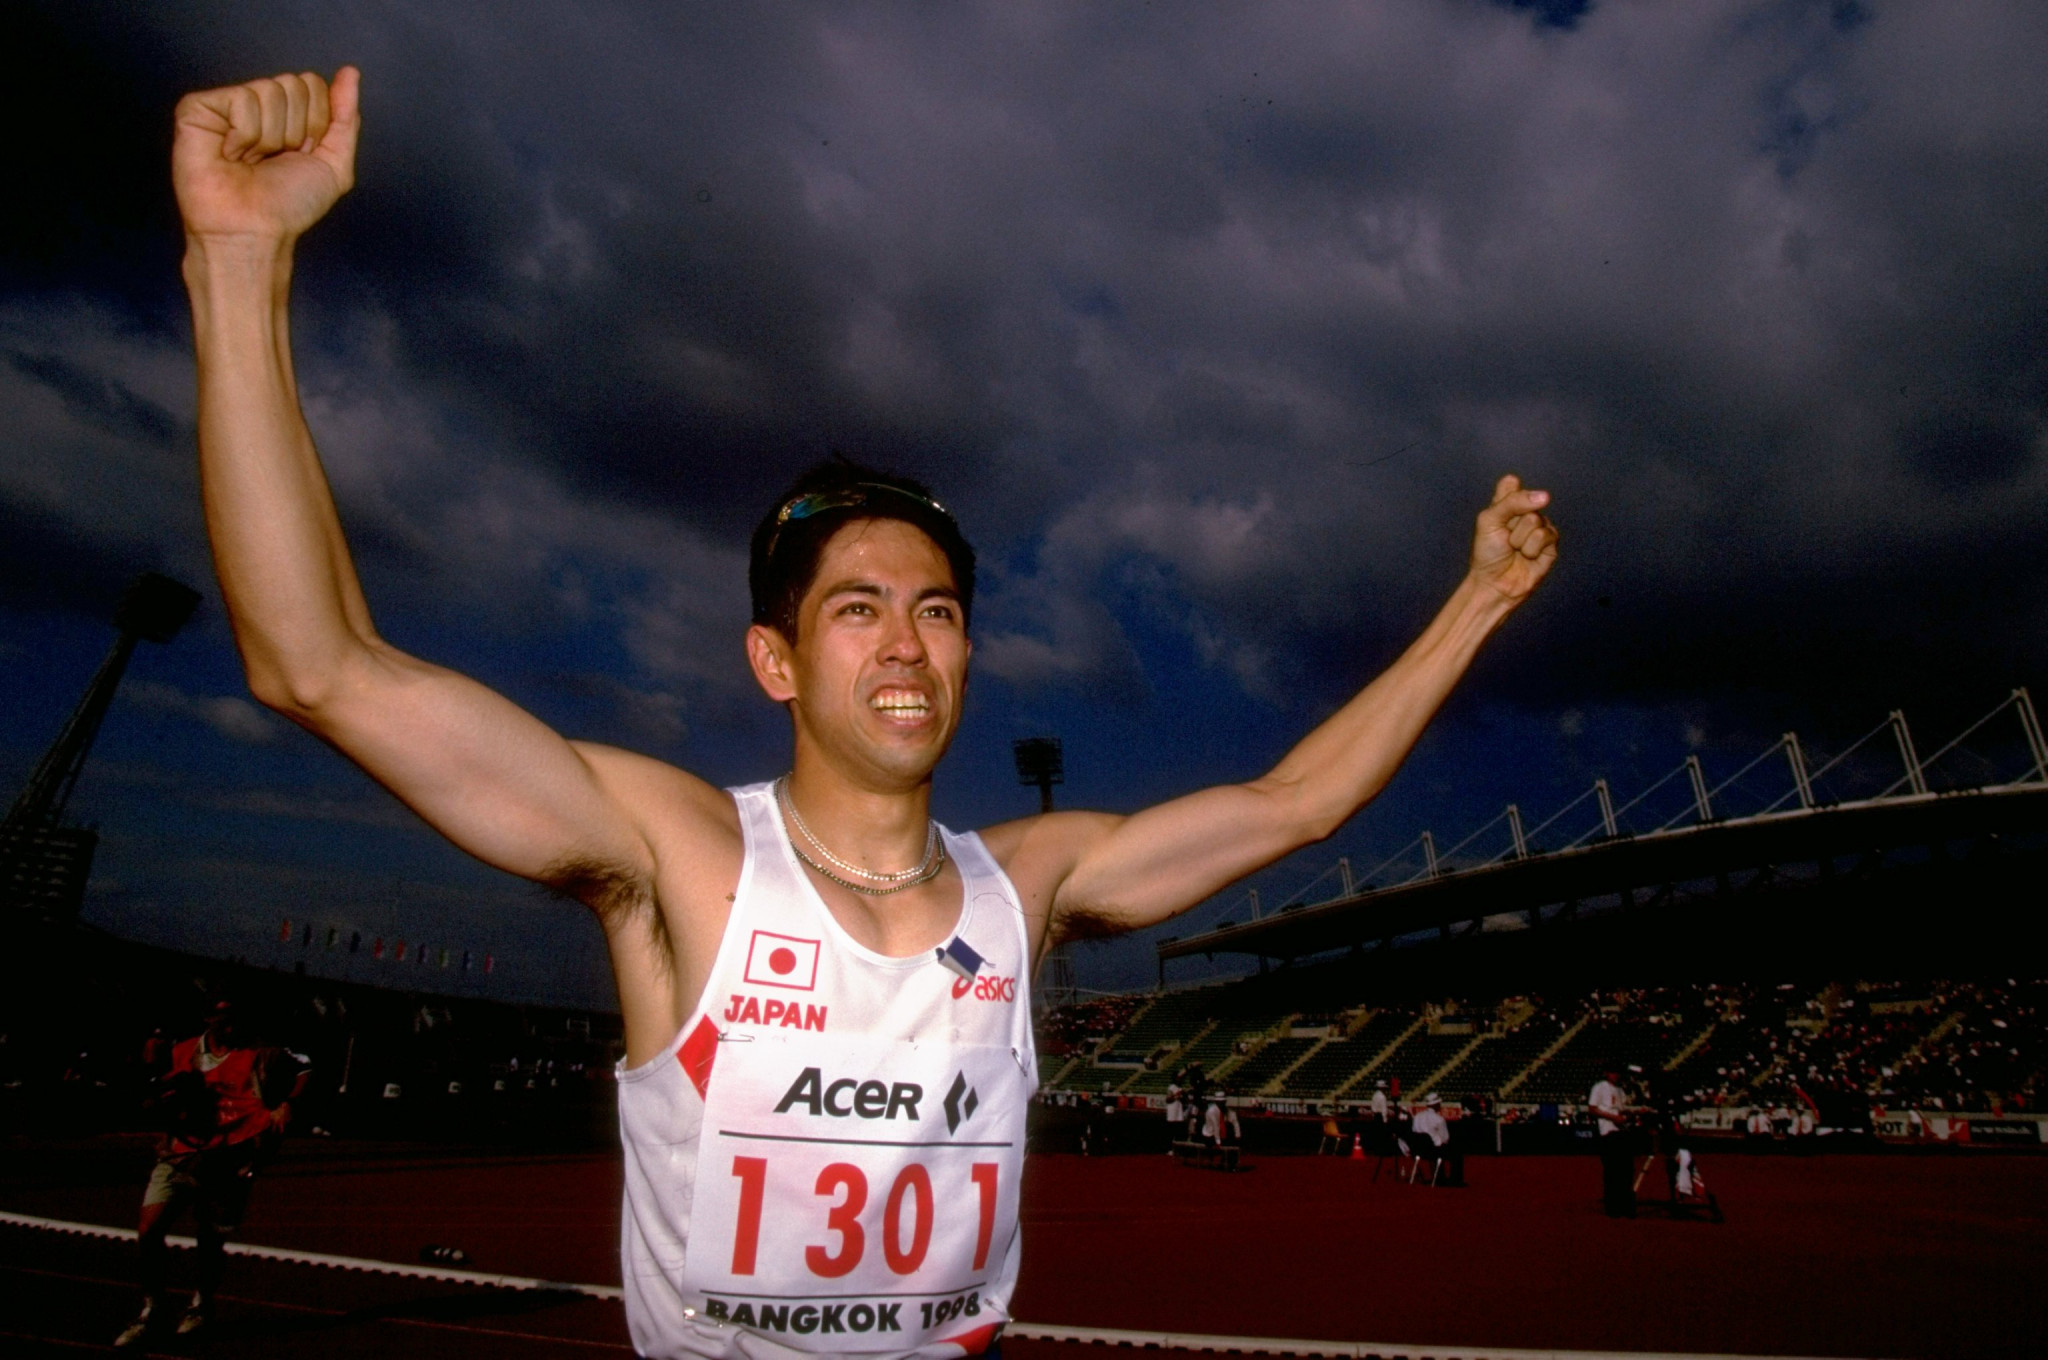 Japanese sprinter Koji Ito won the first award in 1998 ©Getty Images